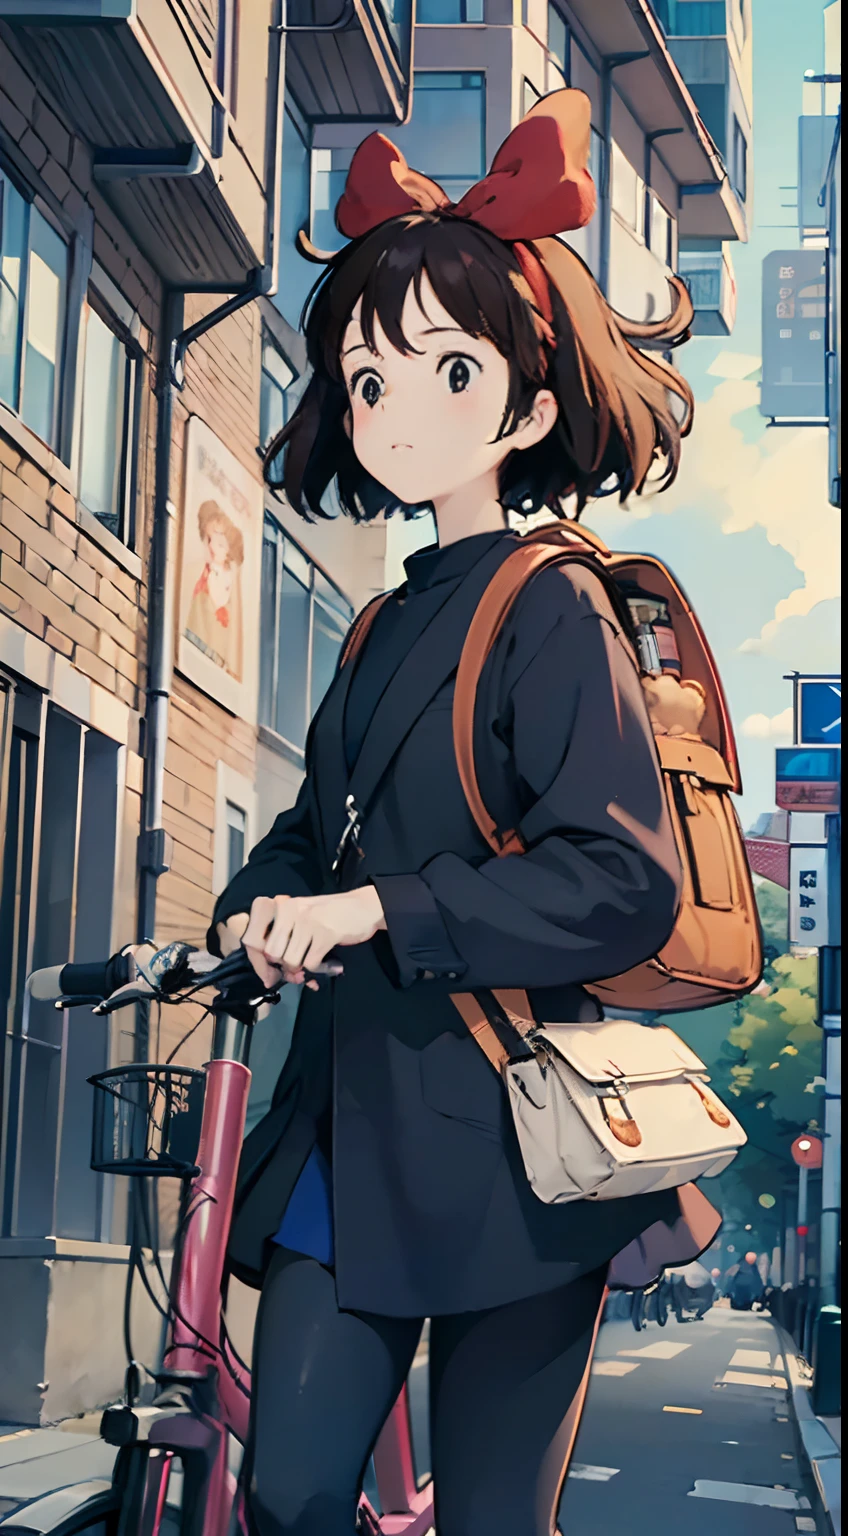 Best image quality, outstanding detail, ultra high resolution, (realism: 1.4), best illustration, prefer details, Kiki carrying a big backpack, posing cute in front of a bicycle, the background is a scene of urban office buildings lined up, black coat, red ribbon, kiki, gigi, active,